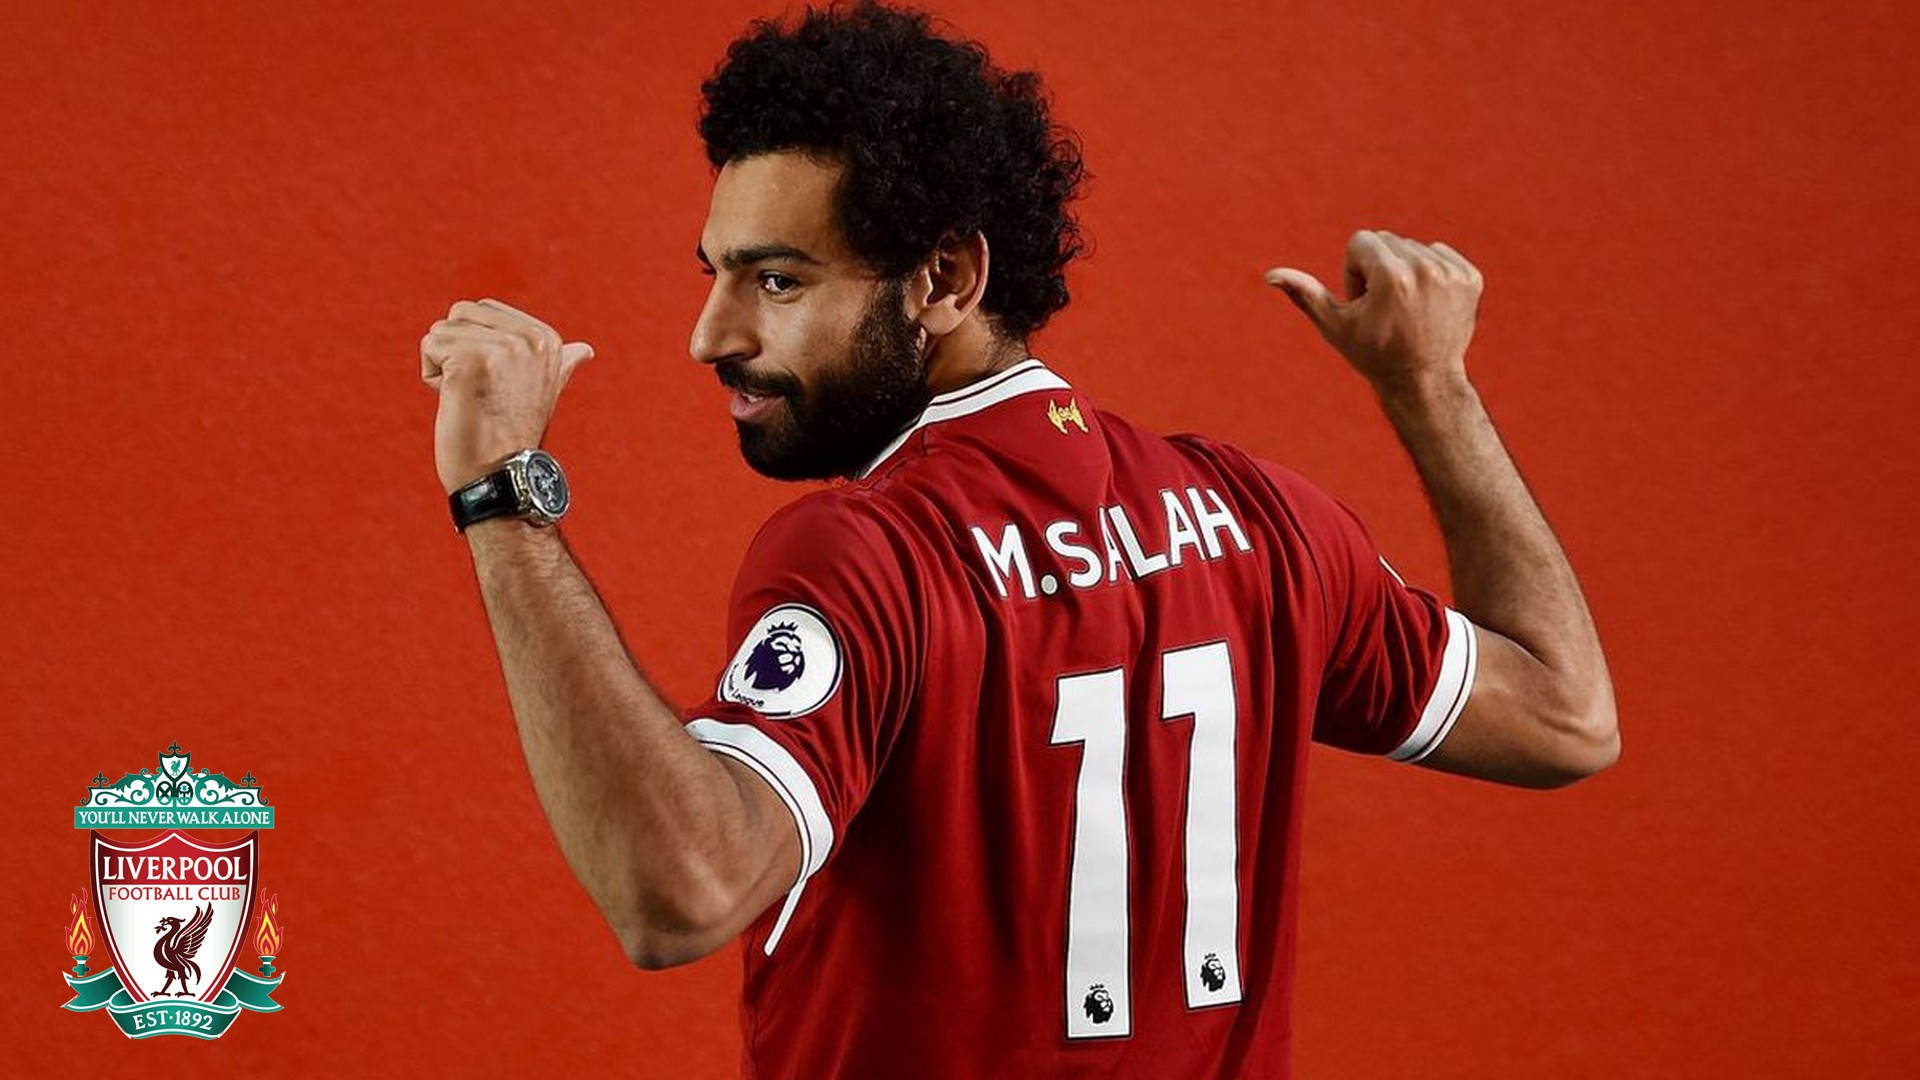 Hd Mohamed Salah Liverpool Backgrounds 2021 Cute Wallpapers We hope you enjoy our variety and growing. hd mohamed salah liverpool backgrounds